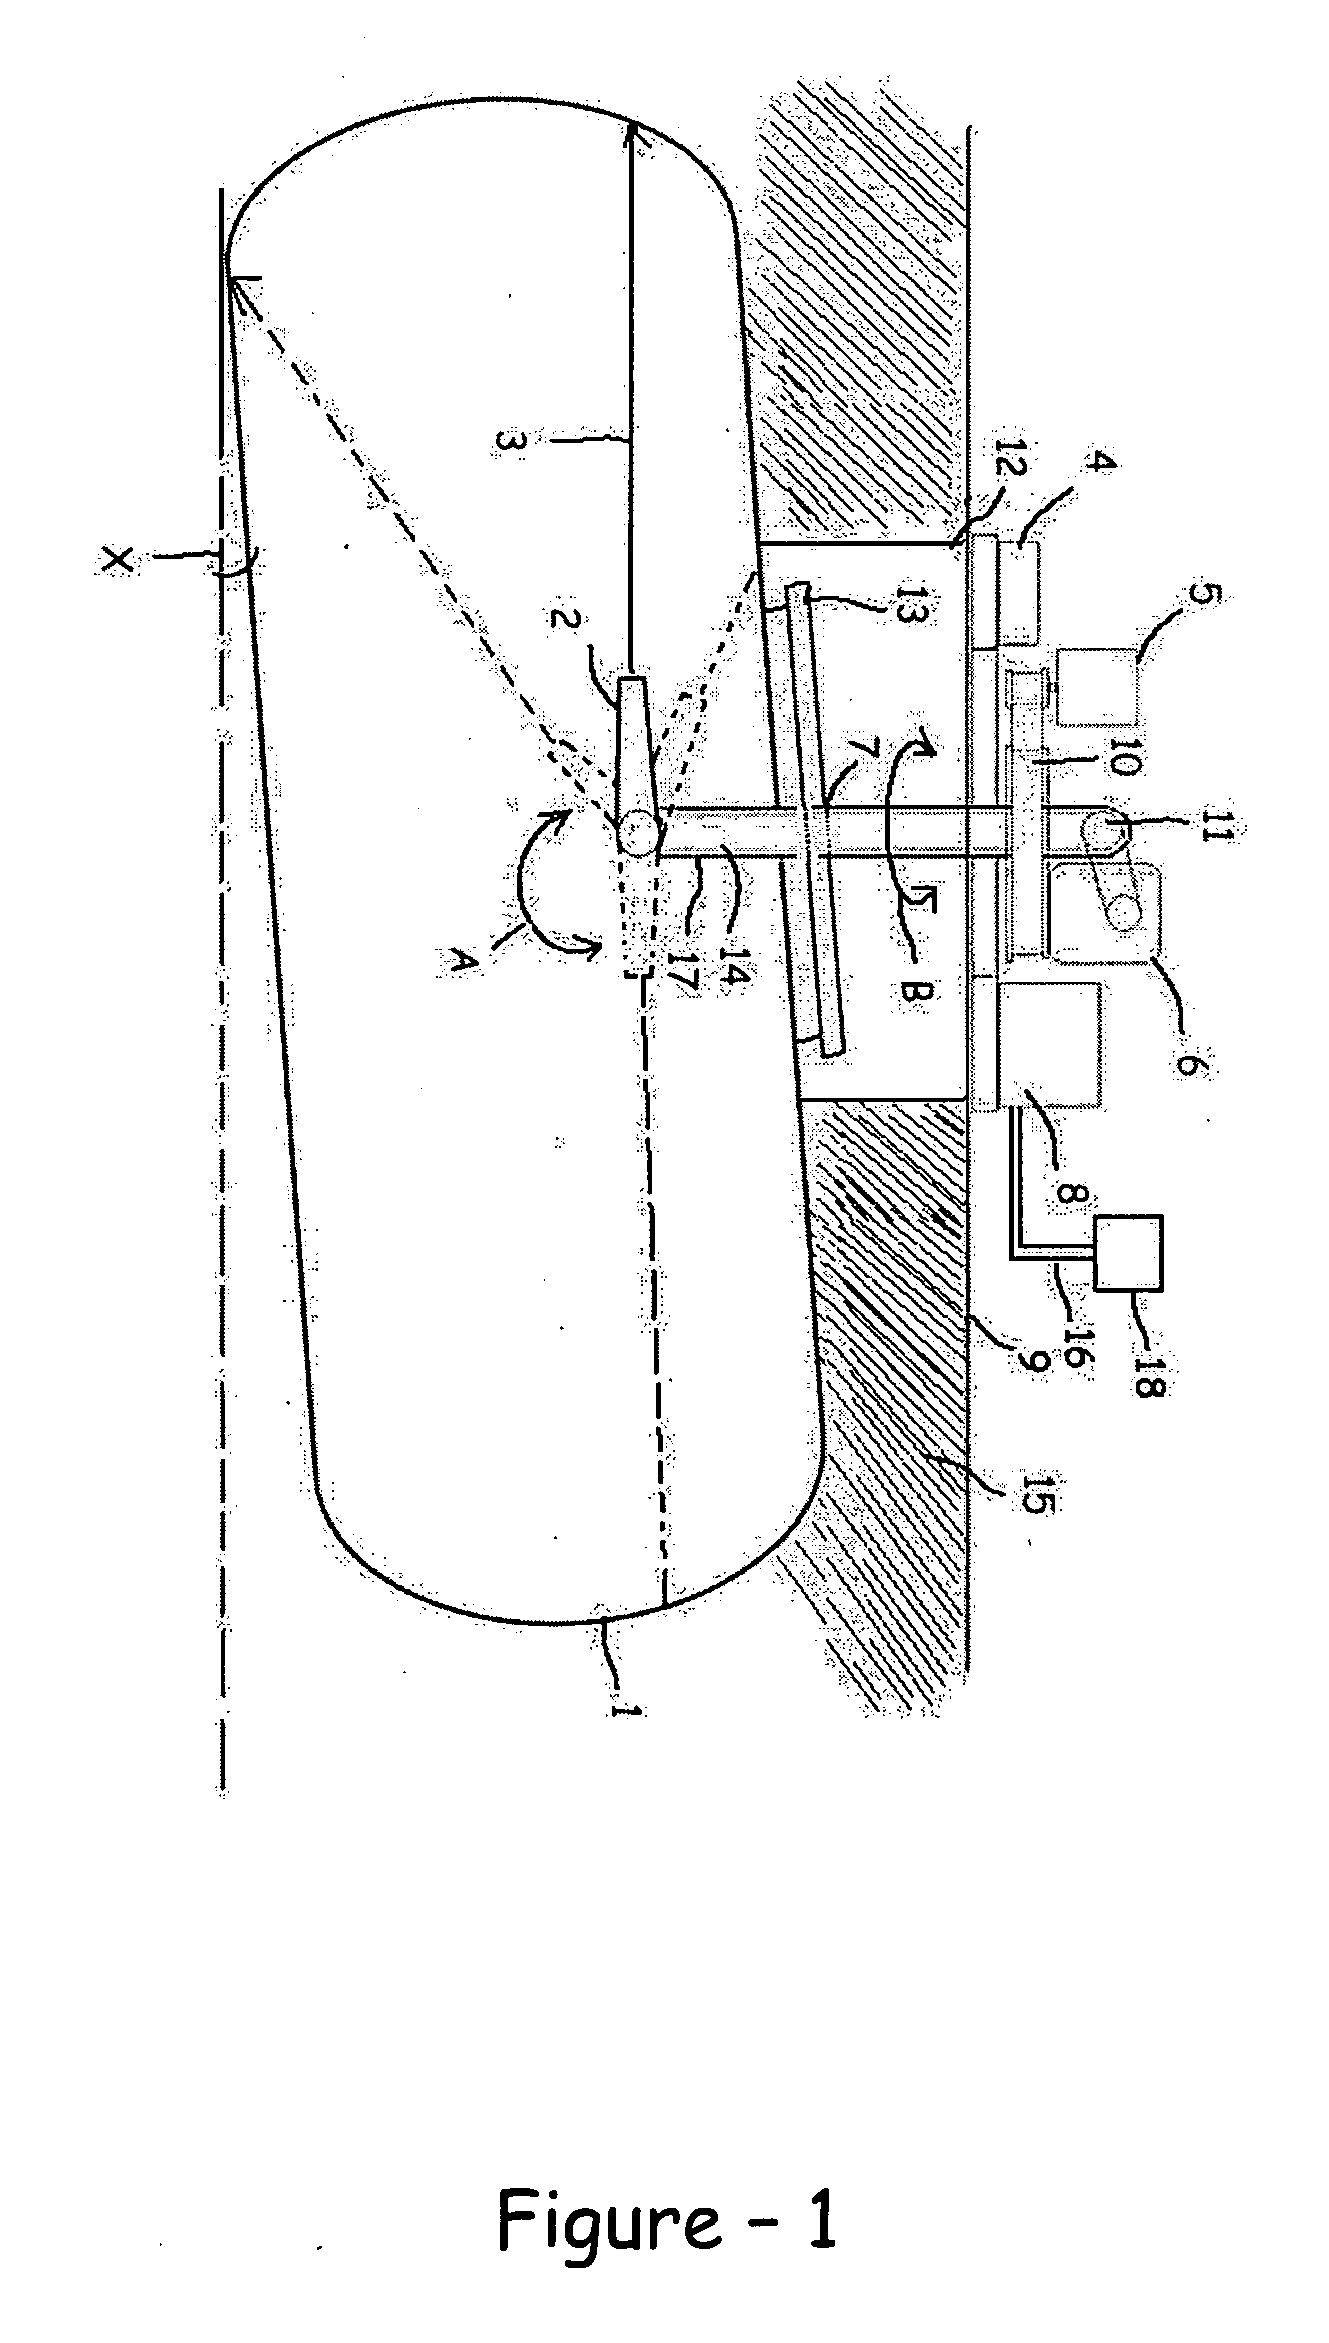 Method and Apparatus for Forming the Calibration Chart for the Underground Fuel Tanks